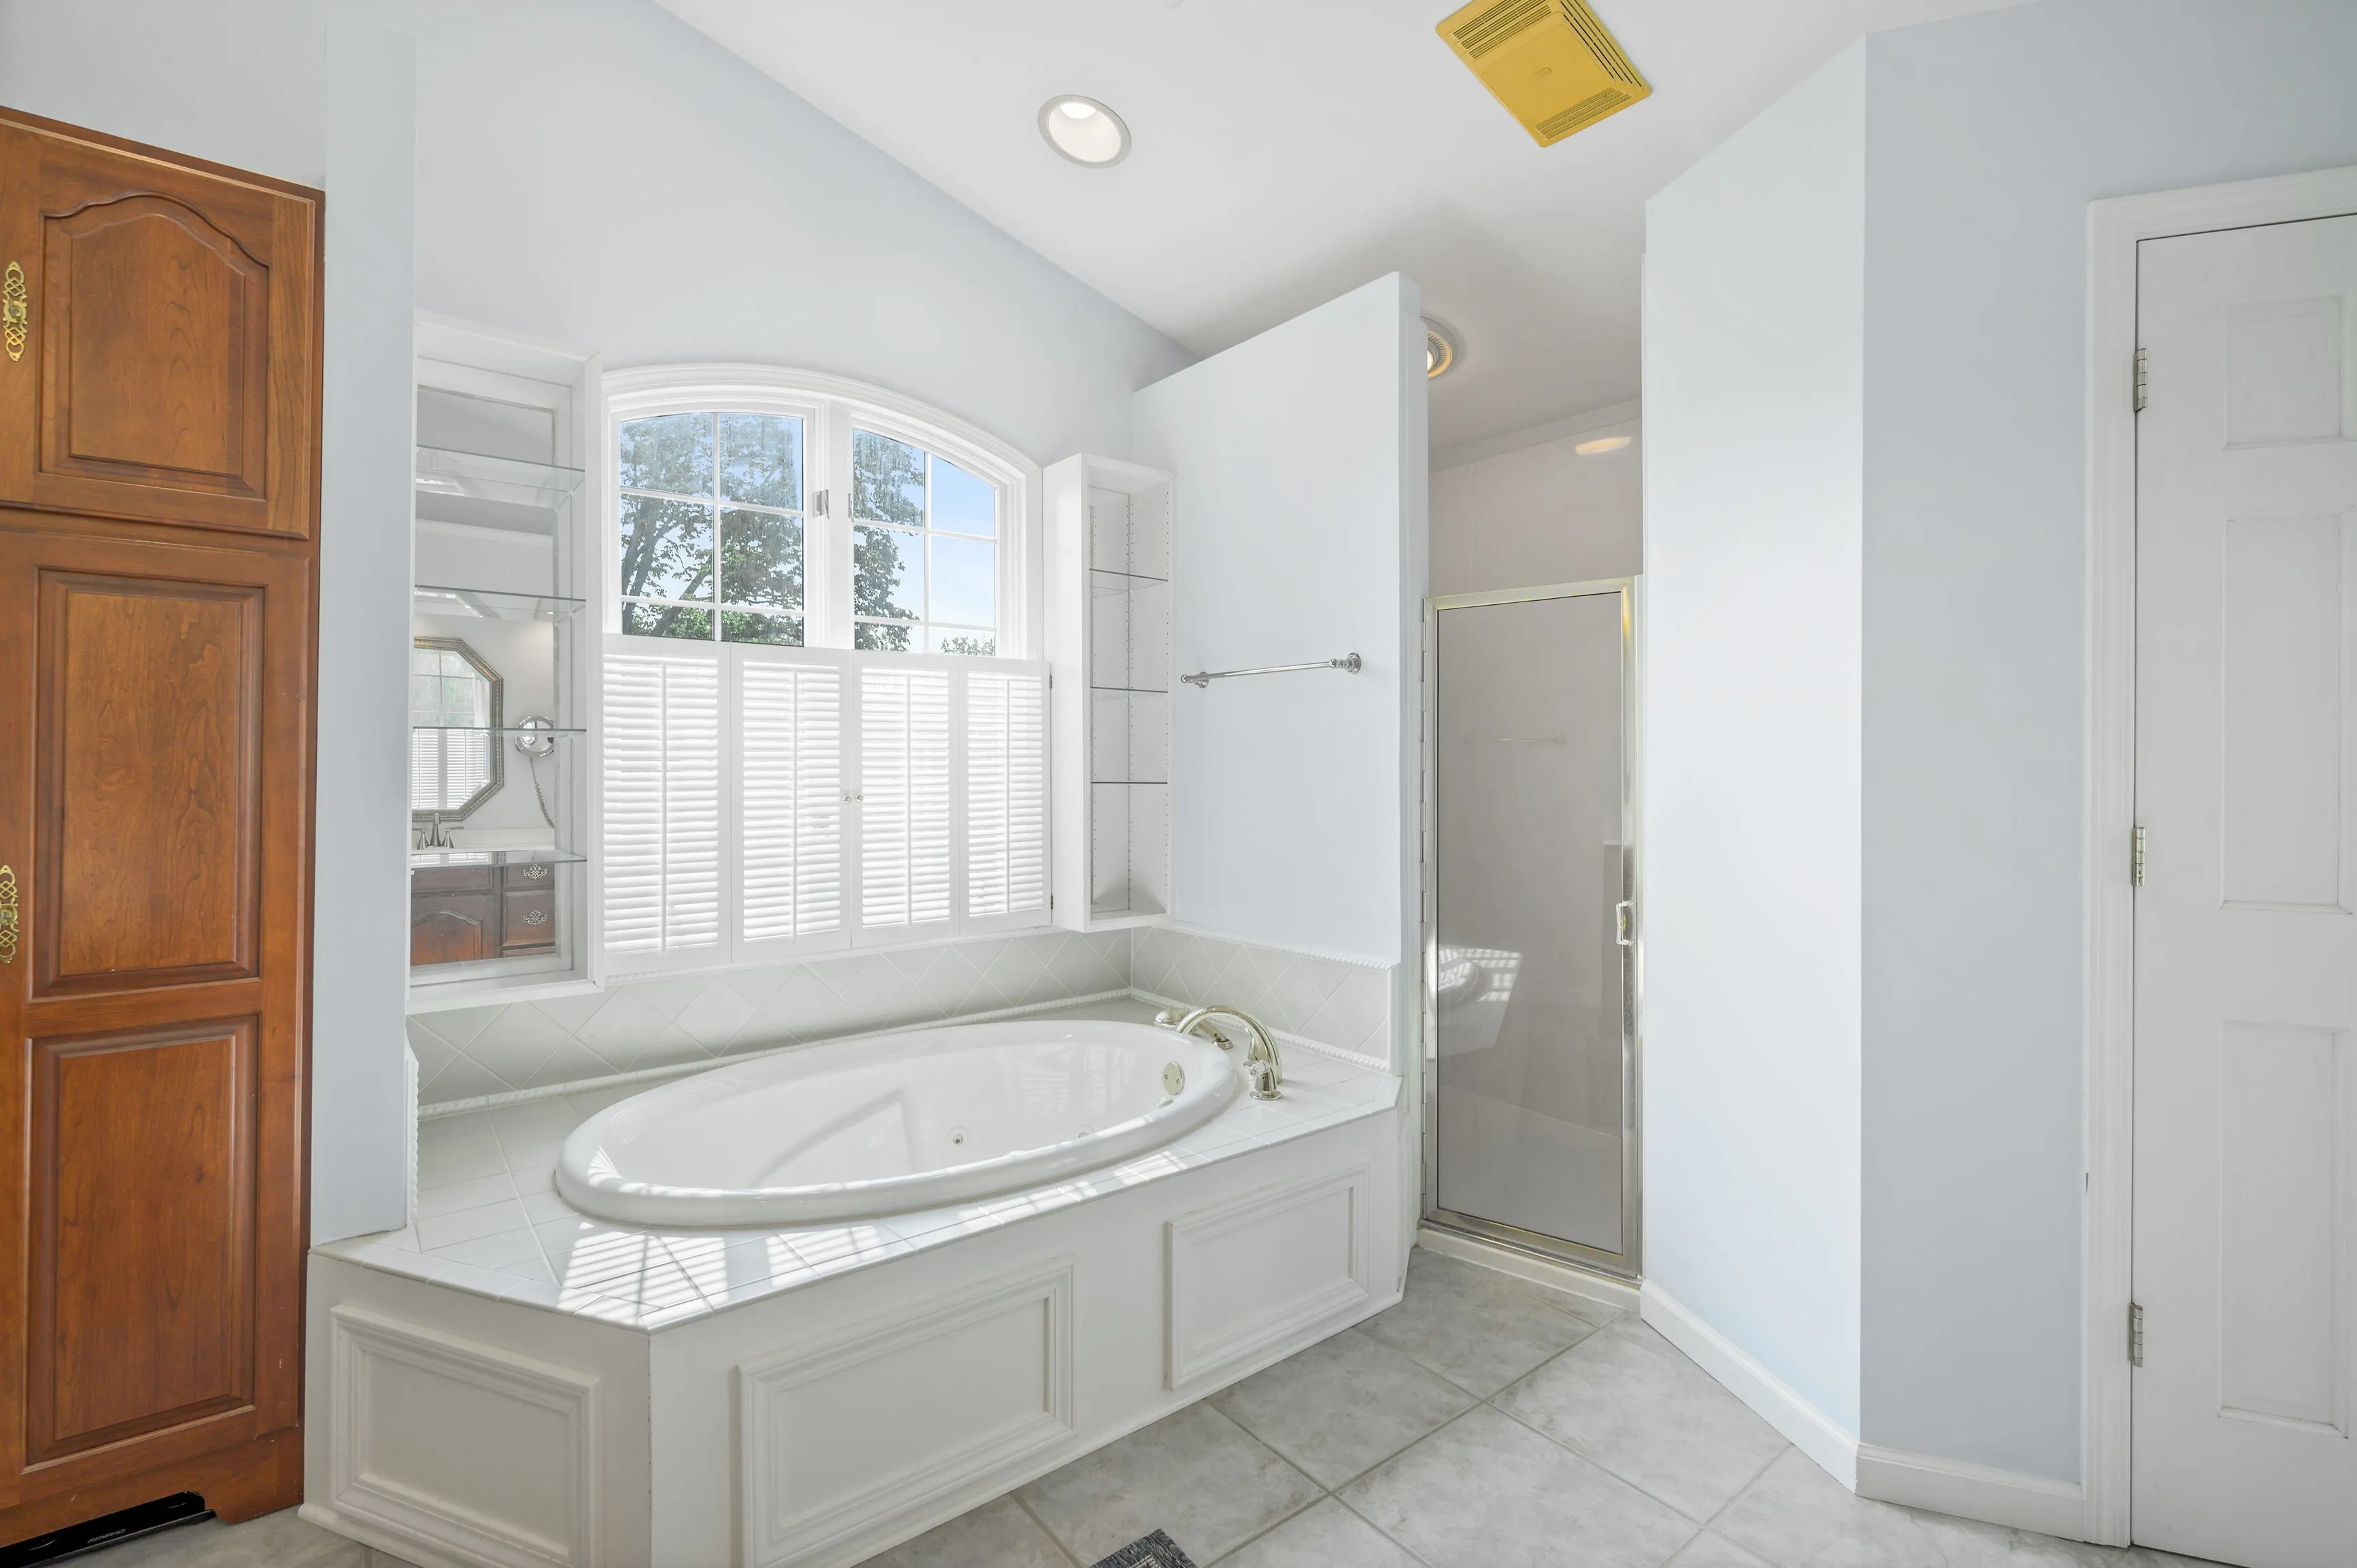 Bright bathroom interior with a corner jacuzzi tub, separate shower stall, wooden cabinet, and large window with blinds.